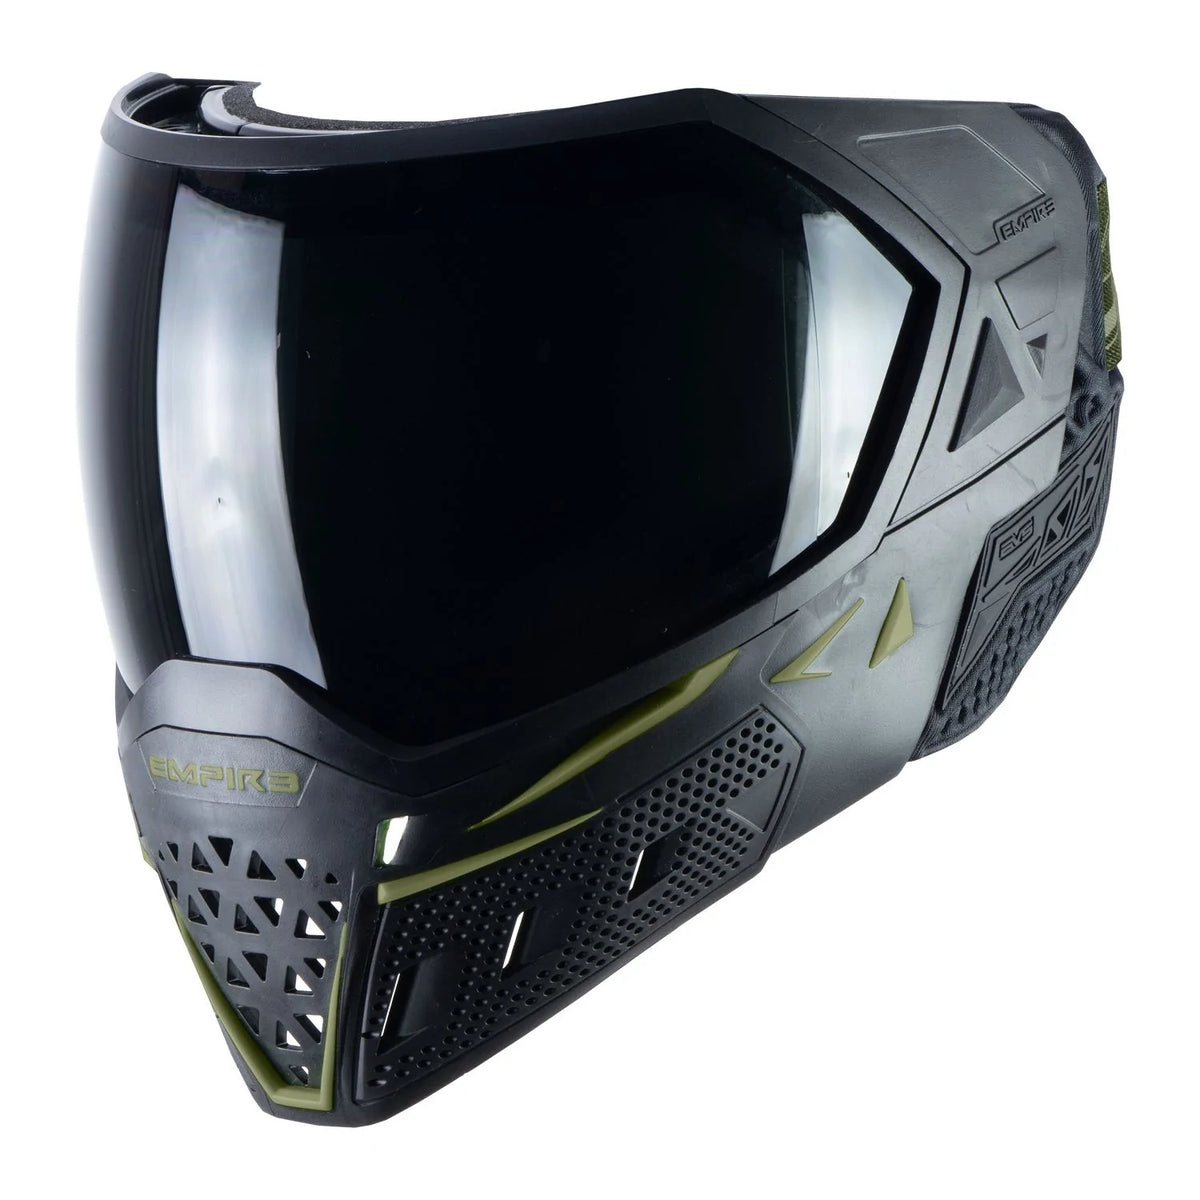 Empire Evs Black/Olive With Thermal Ninja & Thermal Clear Lenses | Shop Airsoft Goggle